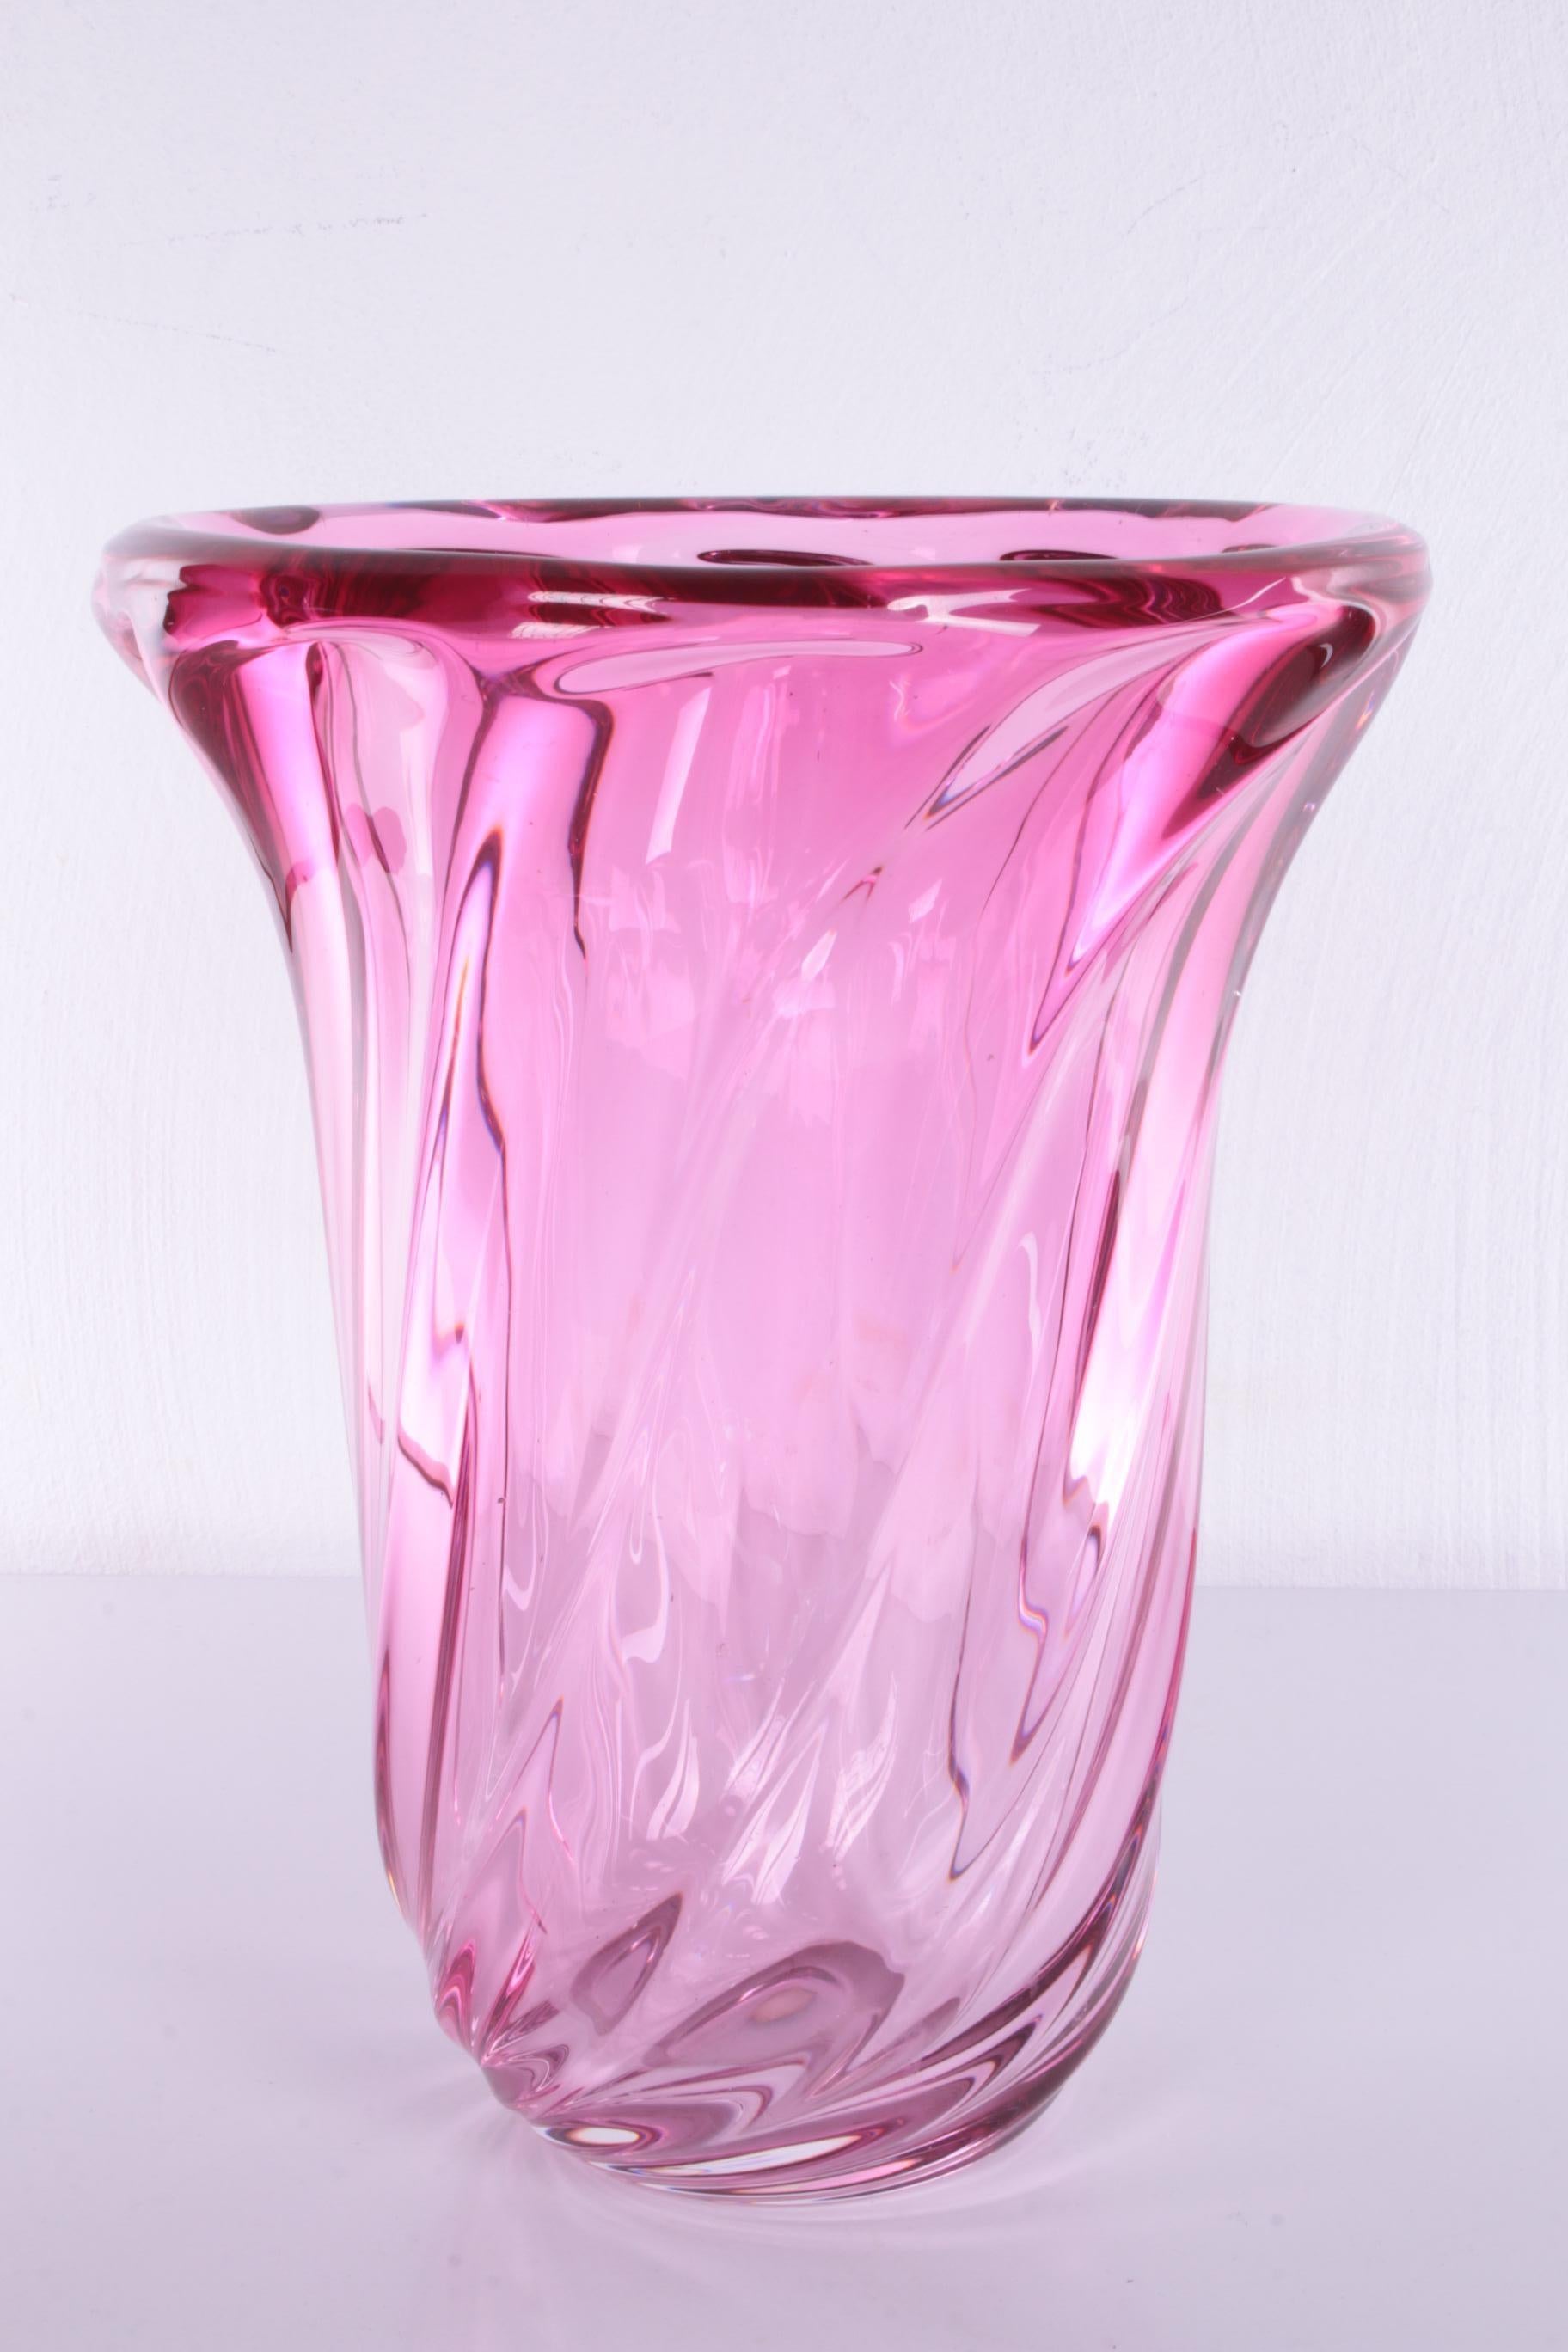 Large Vintage Val St. Lambert crystal vase cranberry


A beautiful pink Val Saint Lambert vase. This is a beautiful large heavy glass vase.

The vase comes from the 1960s from the Belgian crystal factory Val Saint Lambert, whose brand can be